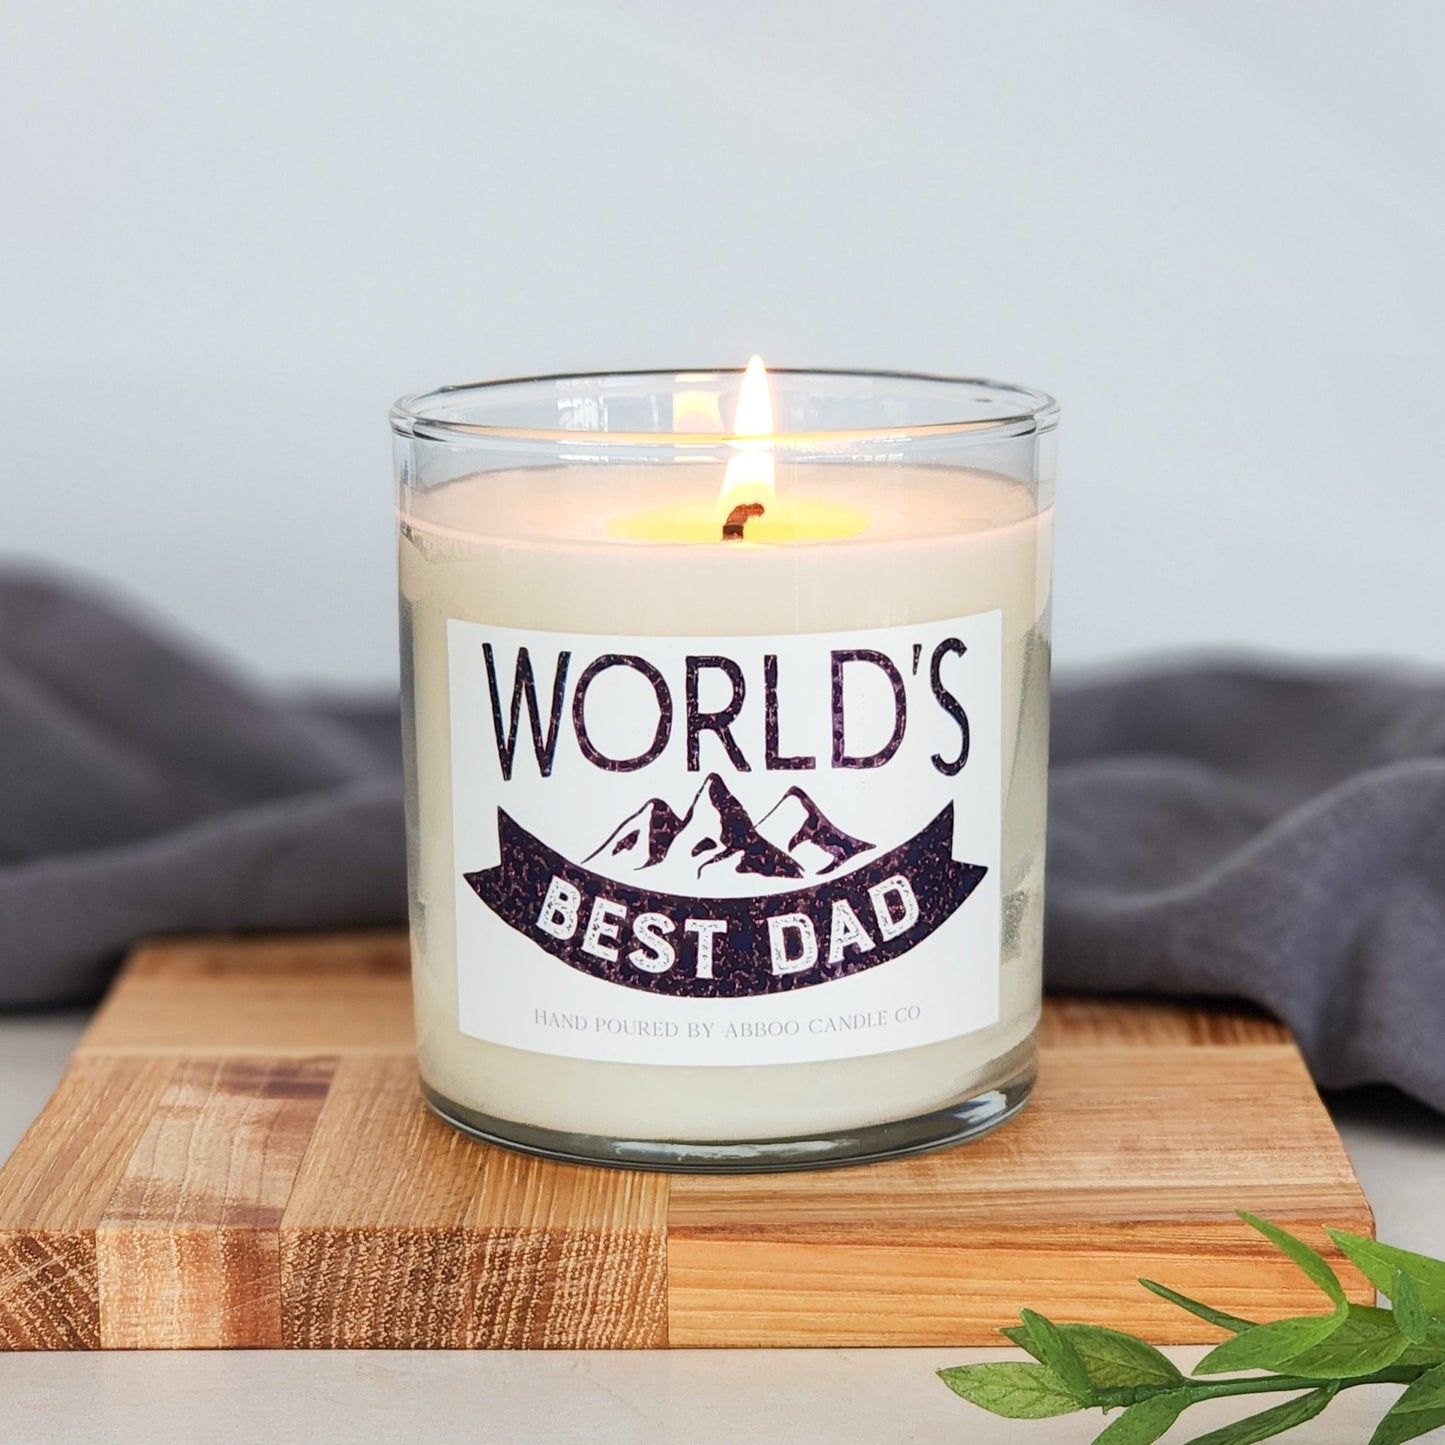 World's Best Dad Soy Tumbler Candle - Abboo Candle Co